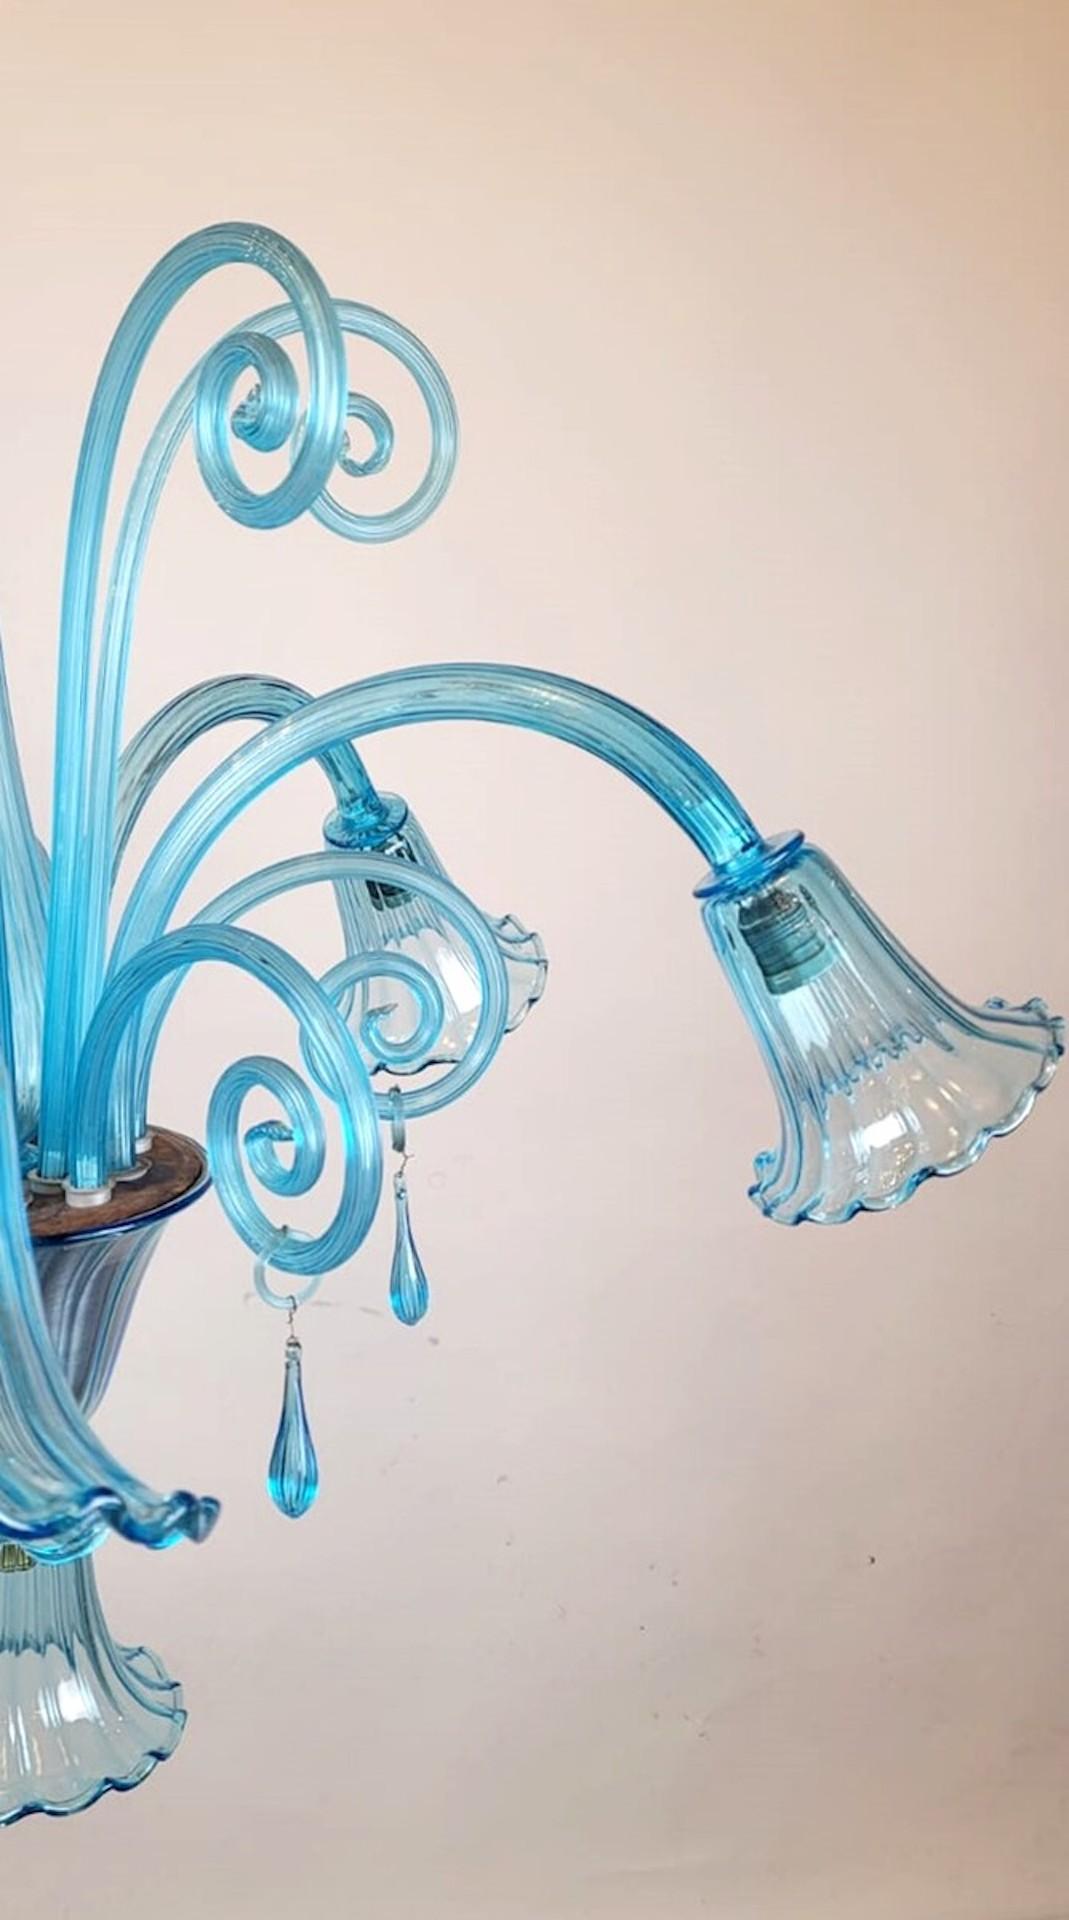 Mid-Century Modern Murano Blue Glass Chandelier - 5 Arms Of Light, 1940s For Sale